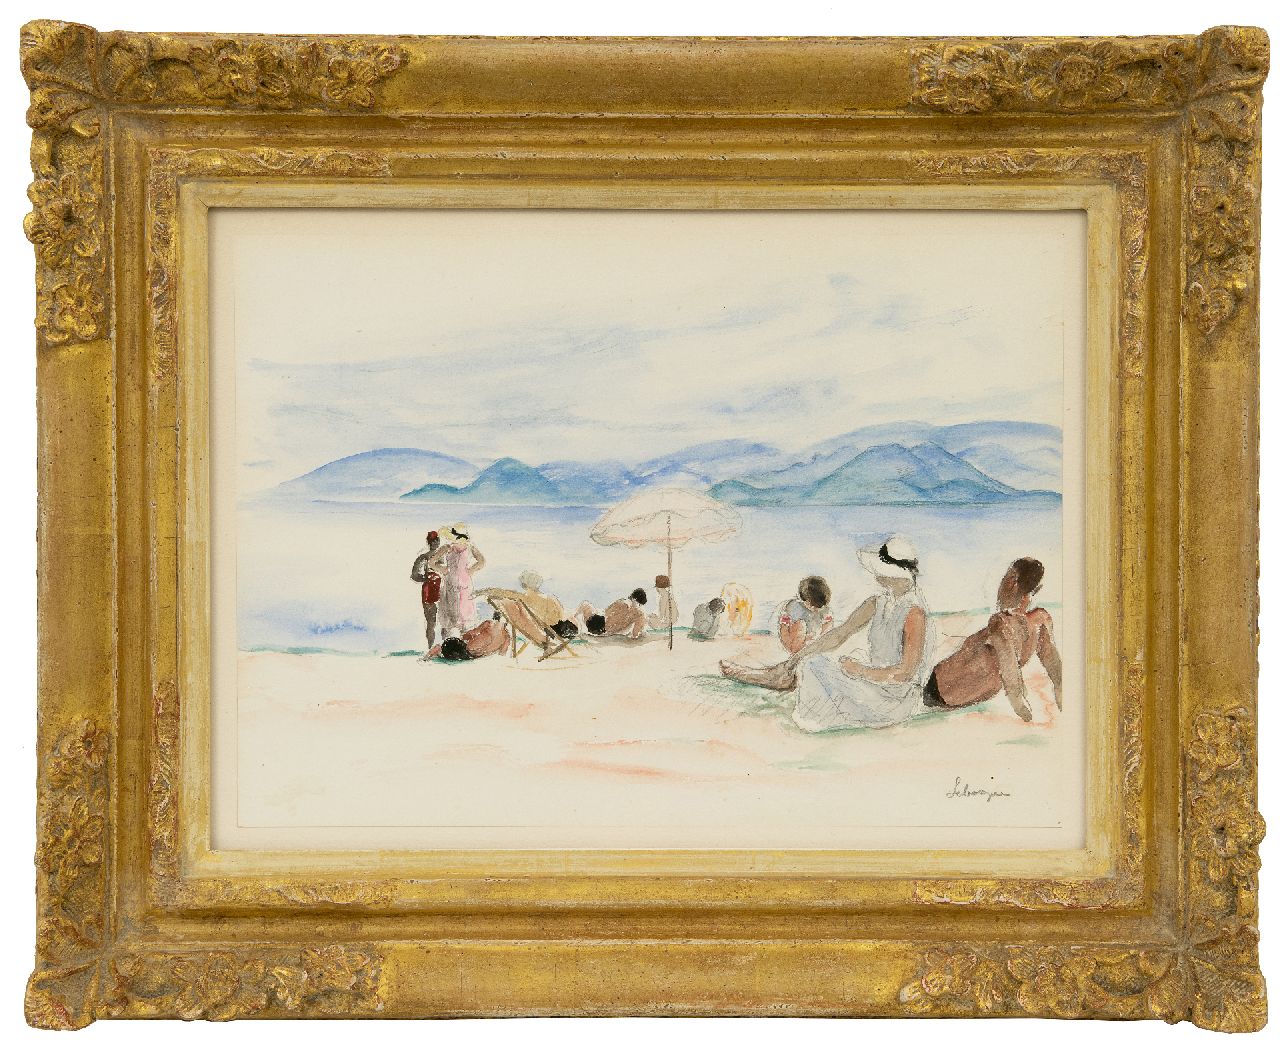 Lebasque H.  | Joseph 'Henri' Baptiste Lebasque, On the beach of Cannes, pencil and watercolour on paper 25.0 x 34.5 cm, signed l.r. and painted ca. 1930